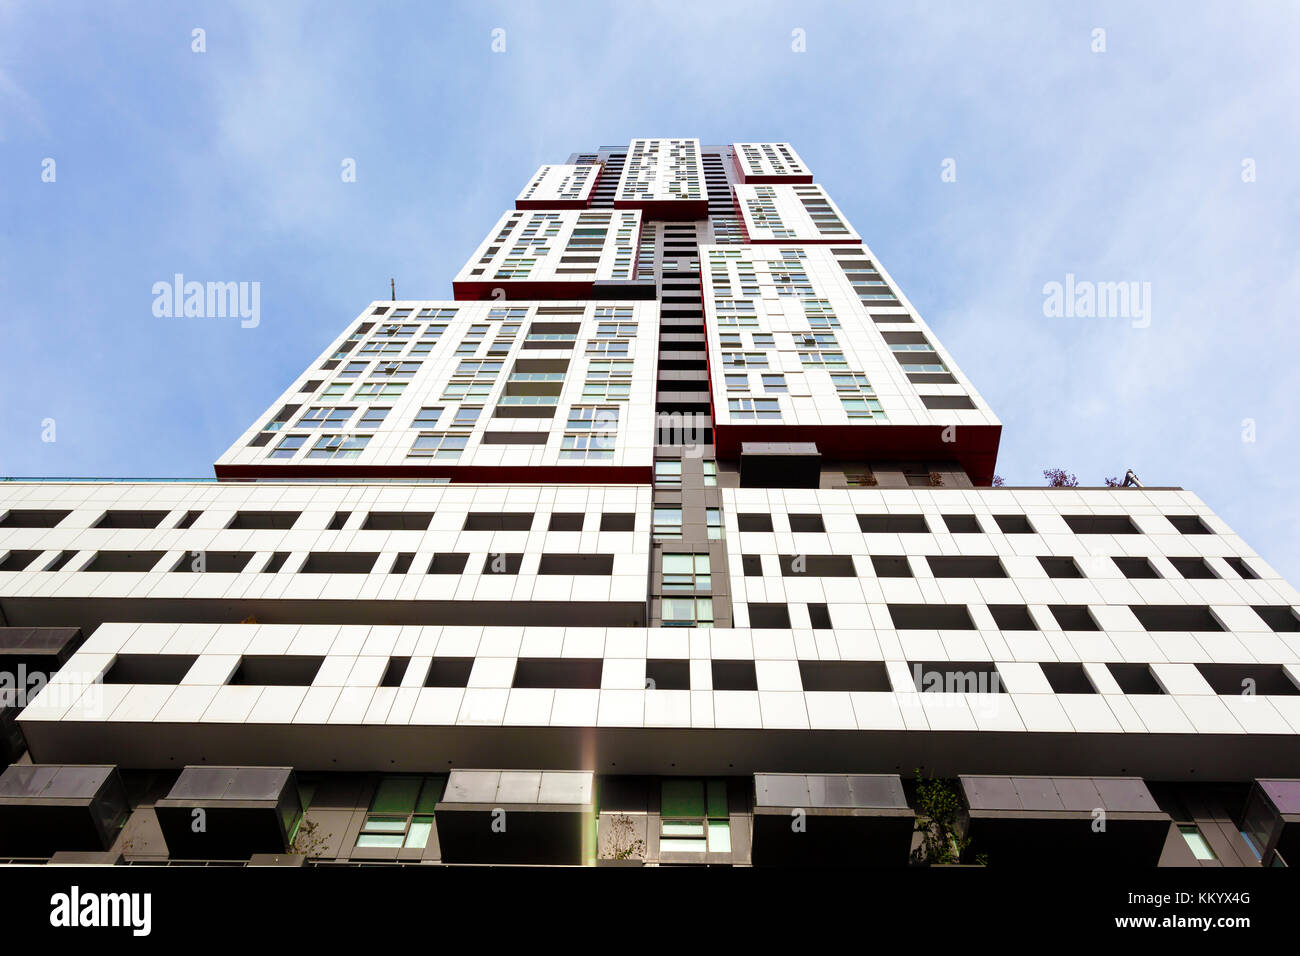 Contemporary residential highrise building in the city Stock Photo